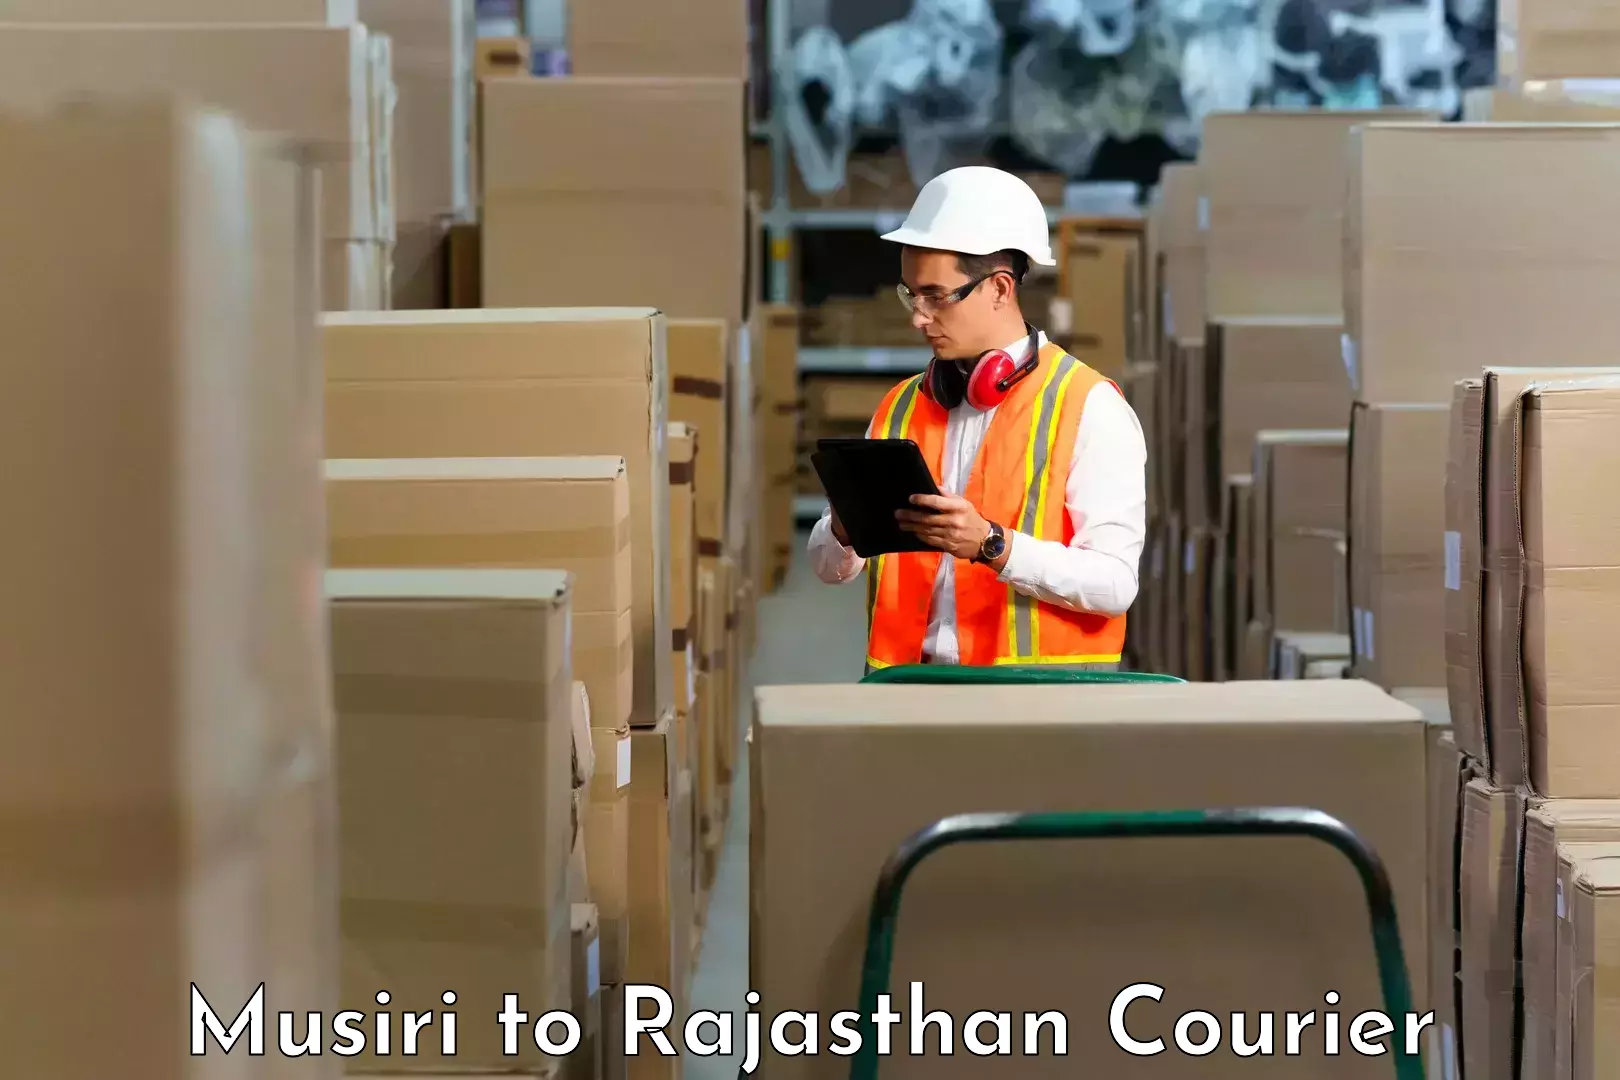 Reliable delivery network Musiri to Ajeetgarh